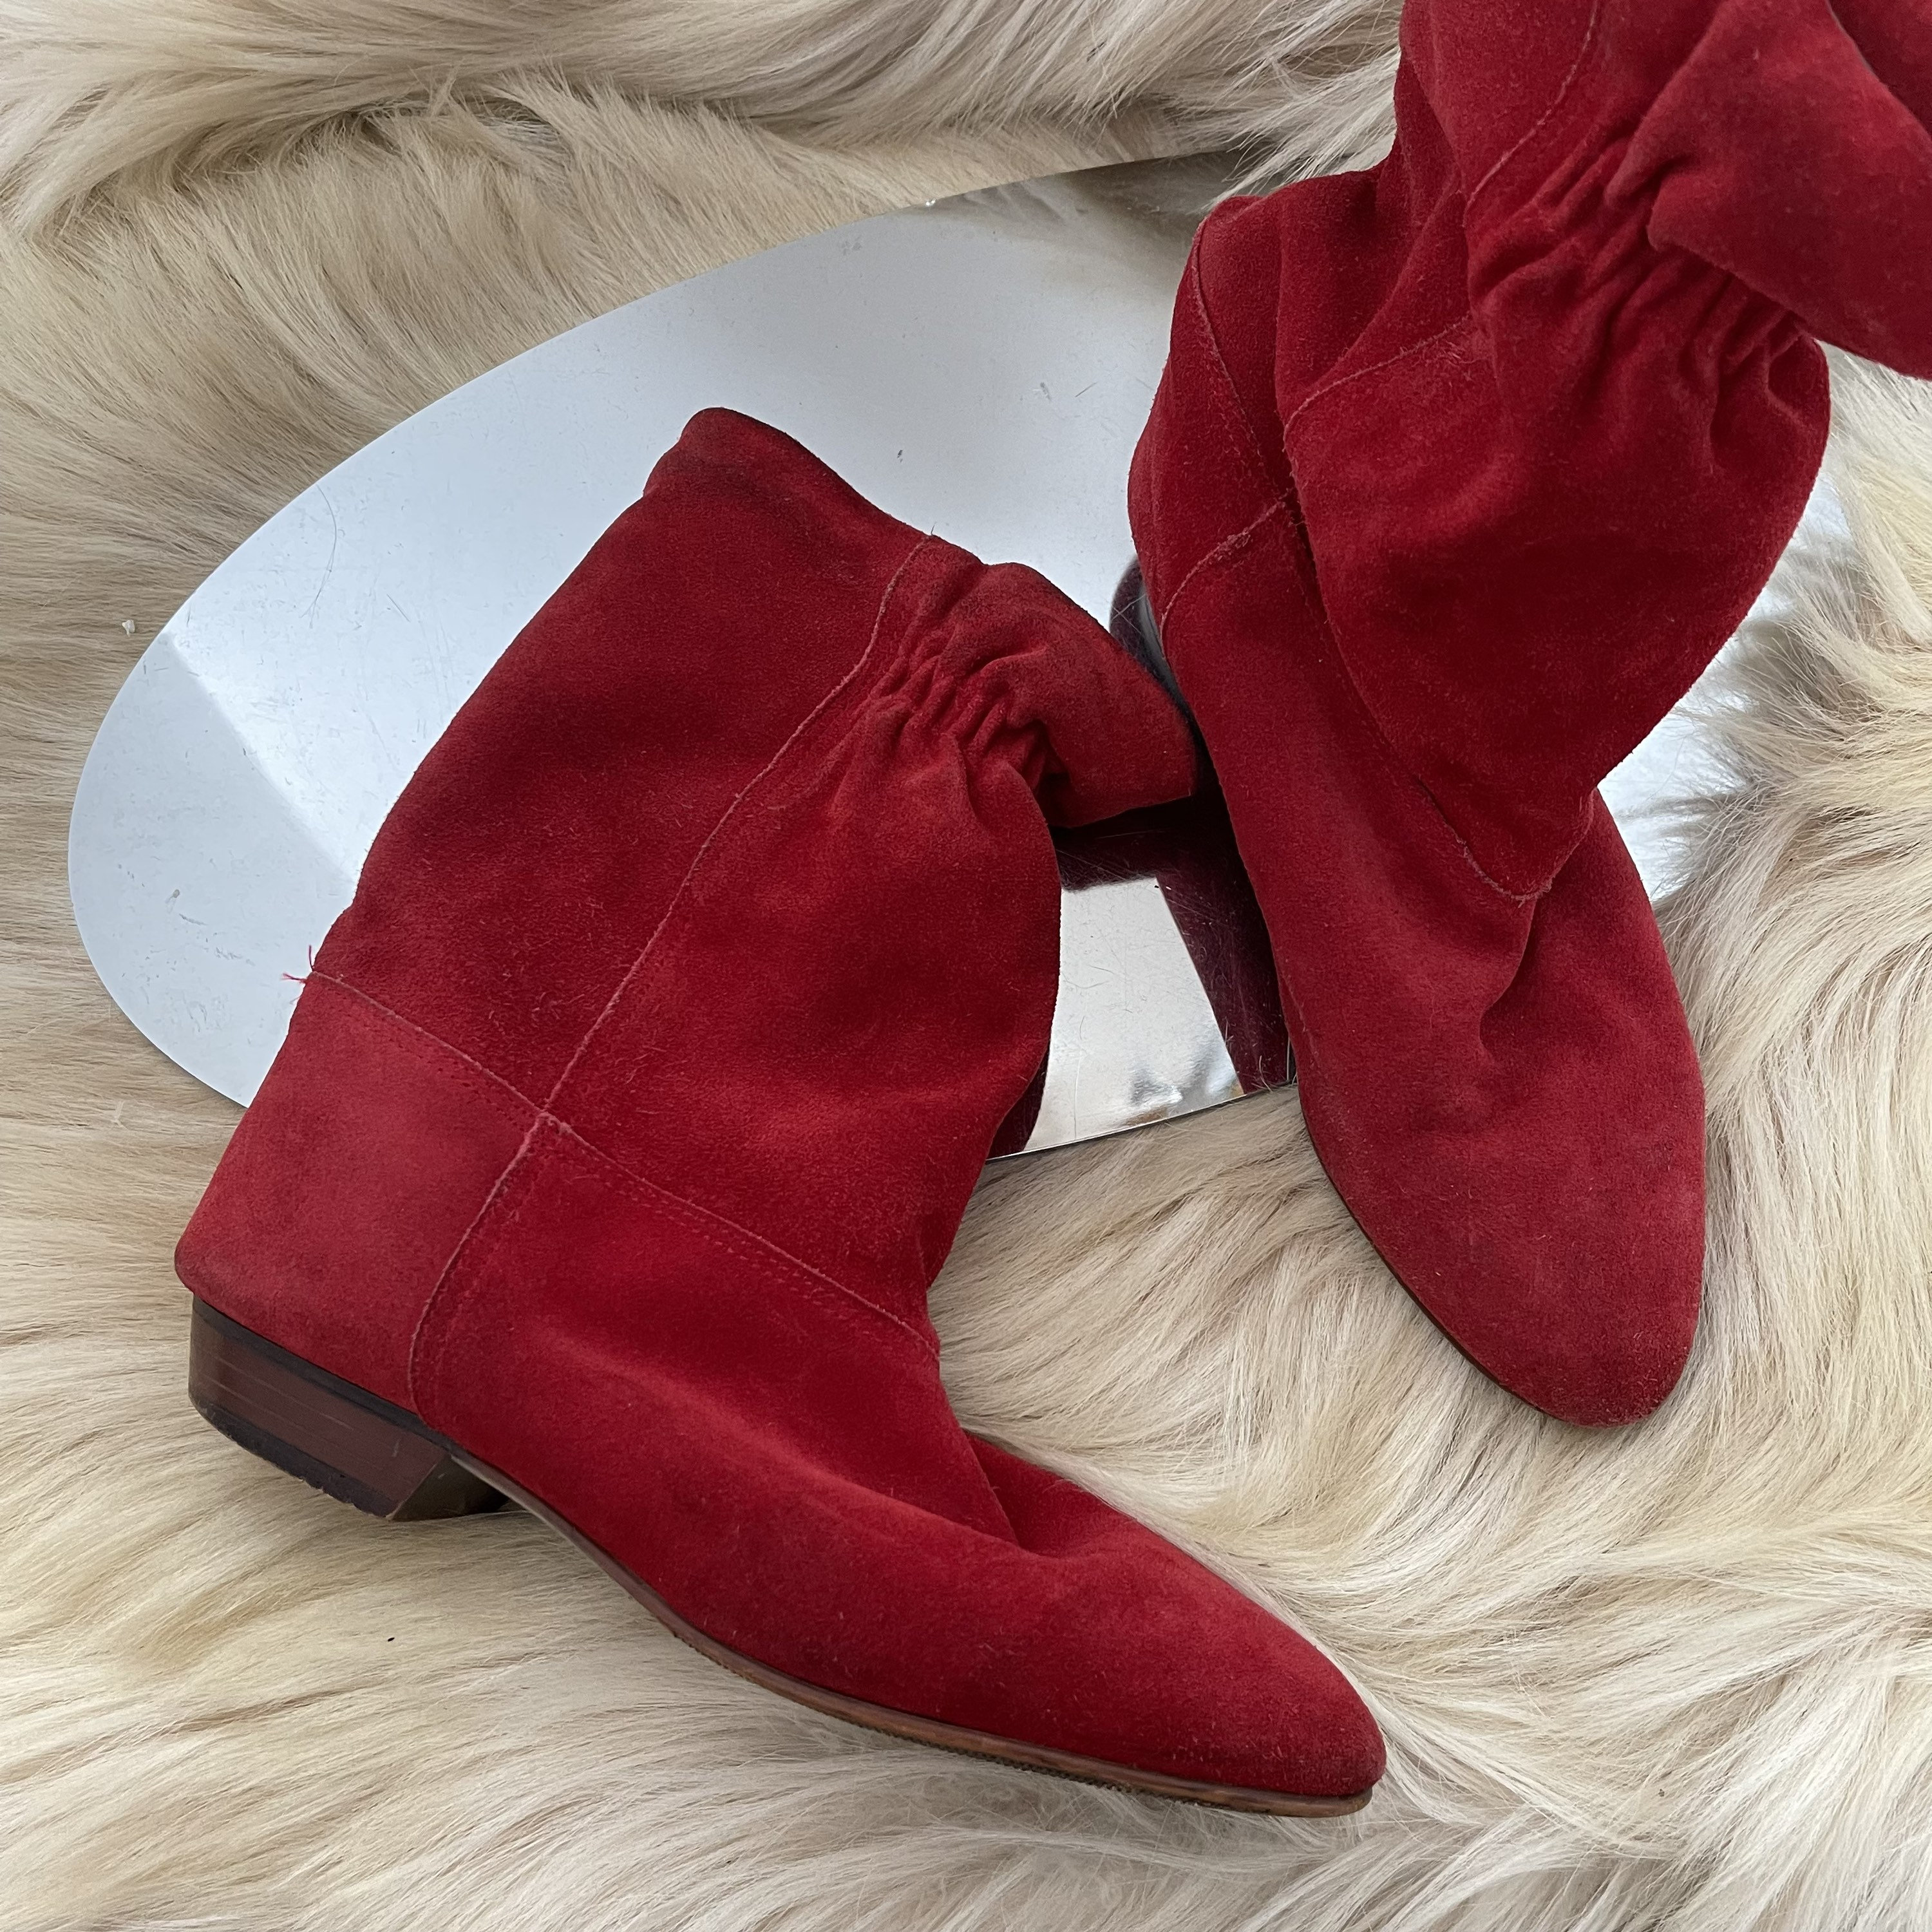 Vintage boots, red boots, 1980s boots, 80s booties, red suede, pixie ...